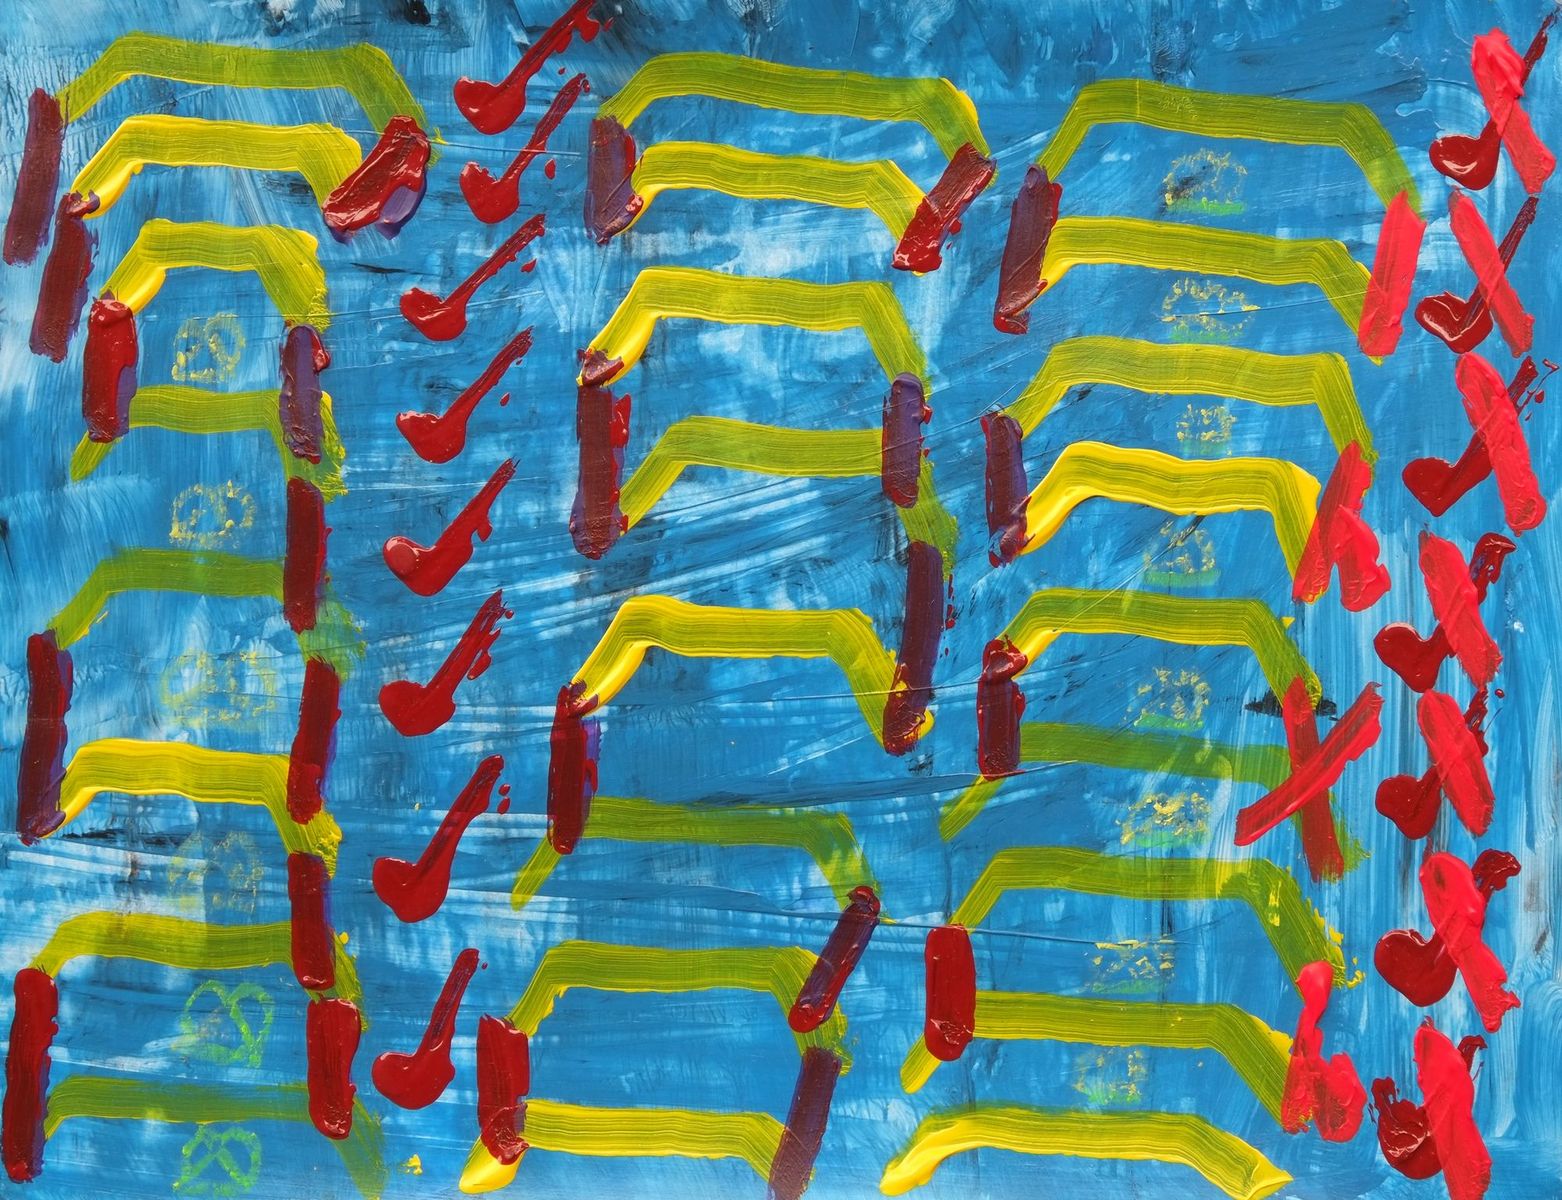 Acrylic and oil pastel on paper artwork with light blue background with yellow balance beams and red checks and x's